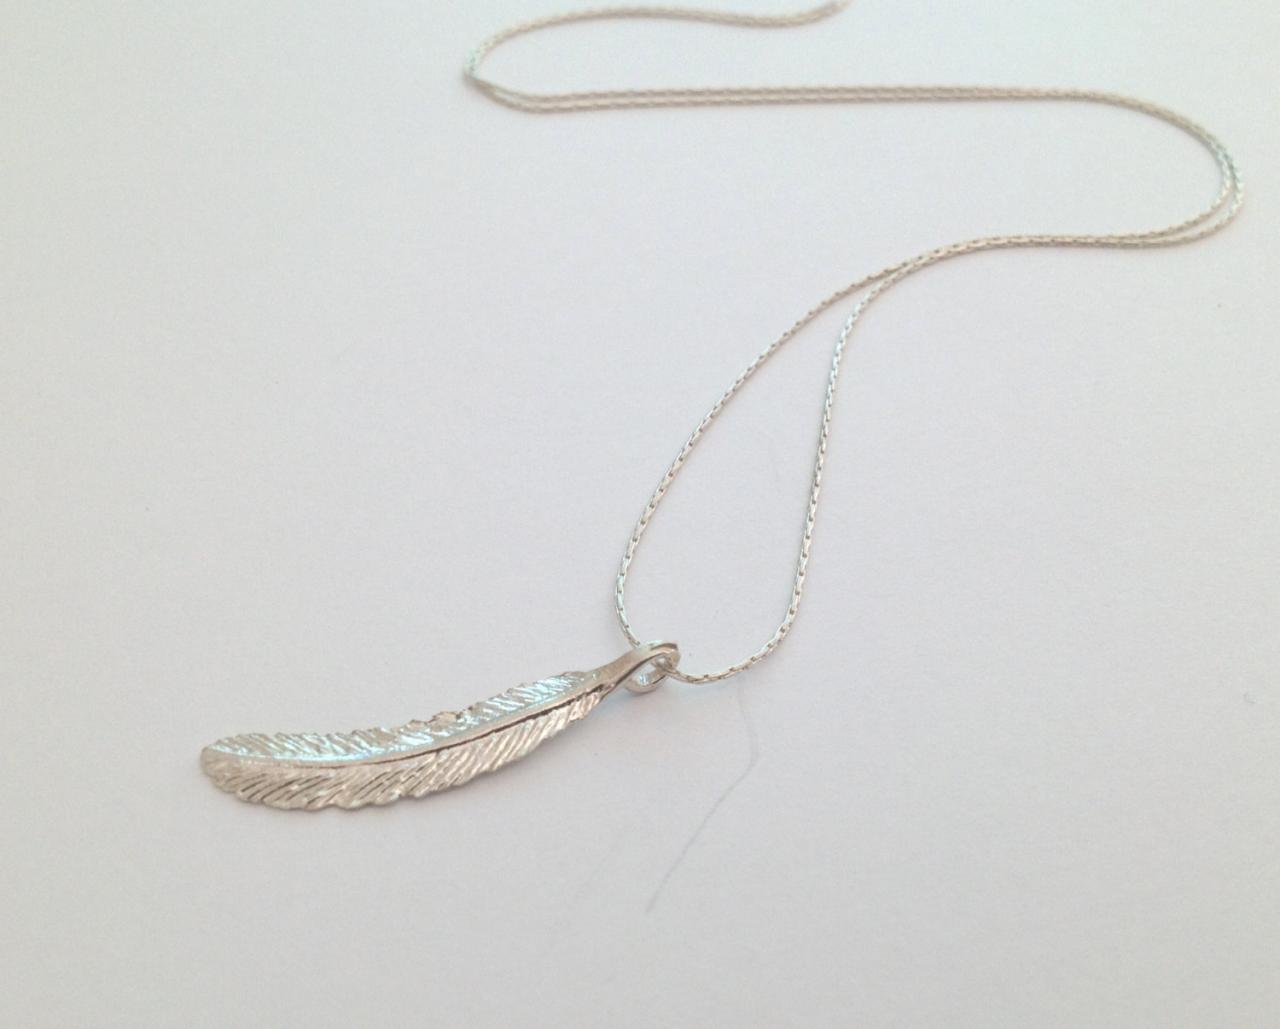 Feather Necklace, Silver Necklace, Silver Feather Necklace, Dainty Necklace, Everyday Necklace, 1gift For Her - 030